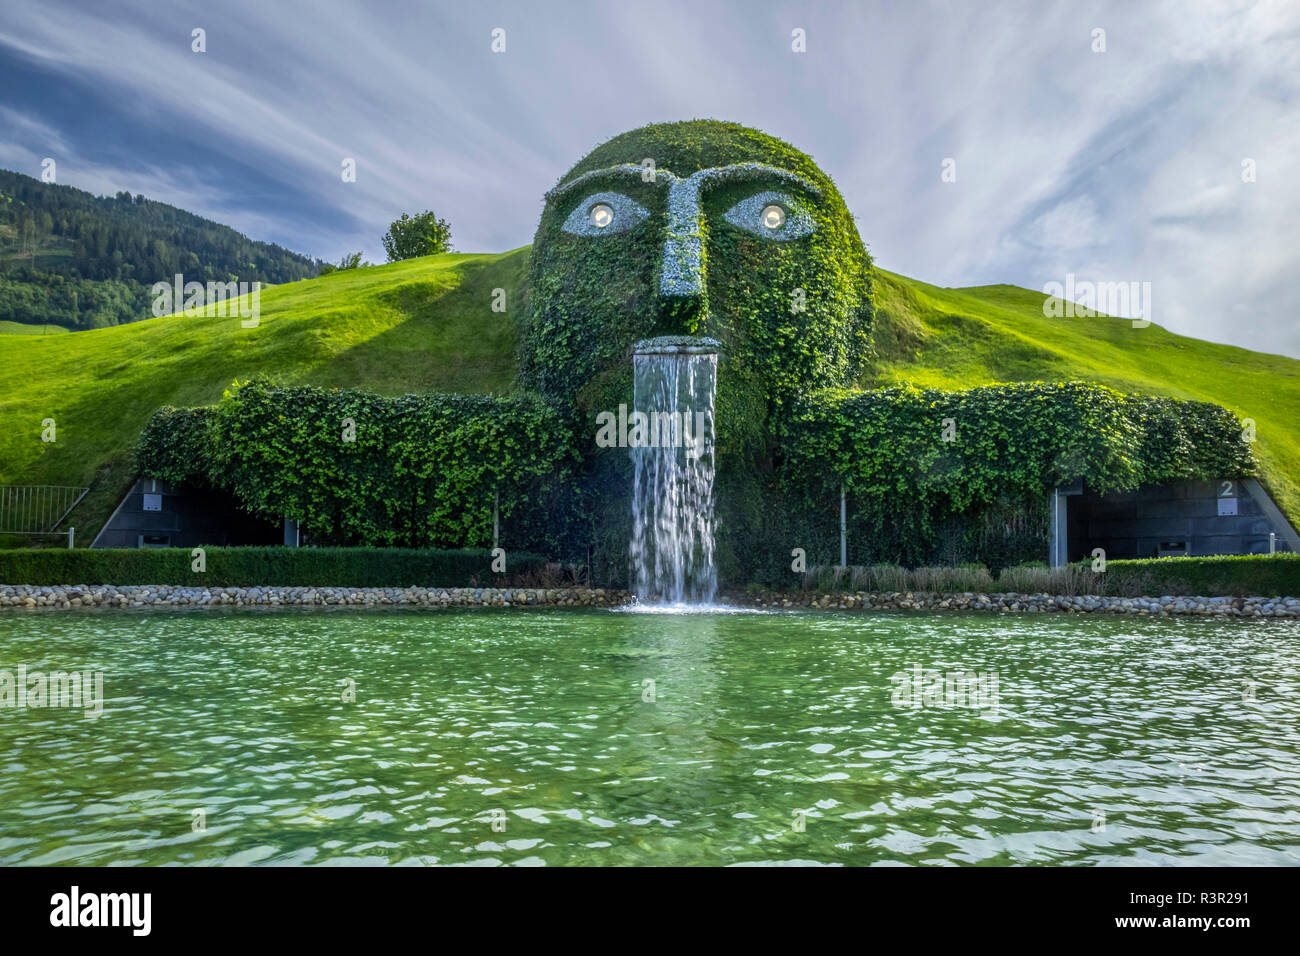 Swarovski Crystal Worlds, entry under the waterfall of the head of the  Giant, Wattens Tyrol, Austria, Europe Stock Photo - Alamy